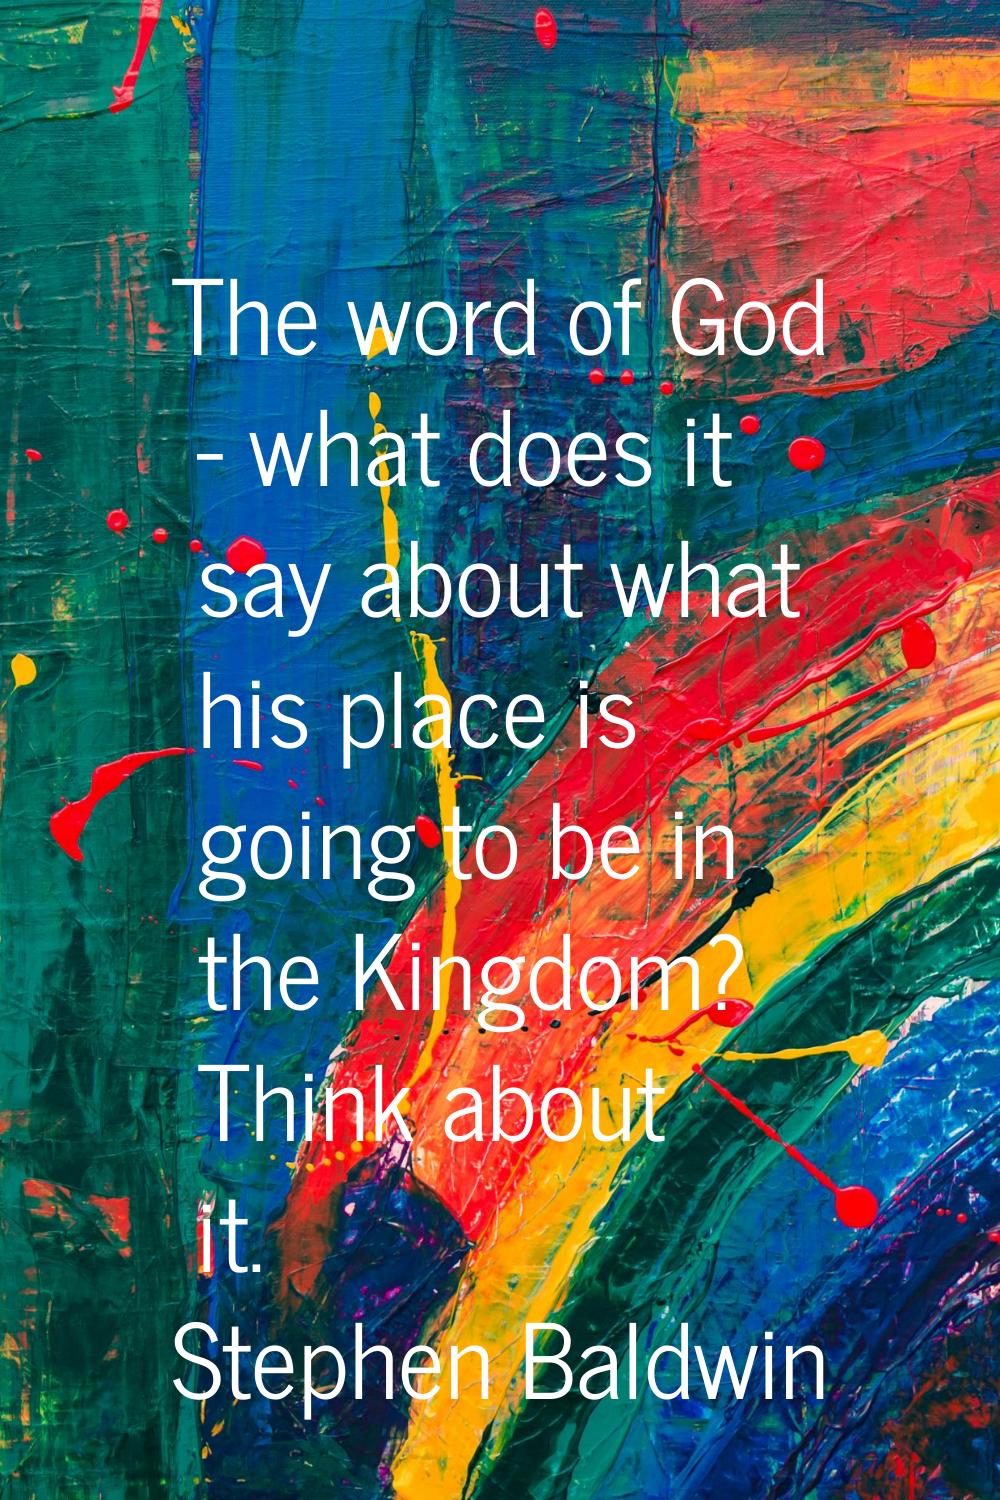 The word of God - what does it say about what his place is going to be in the Kingdom? Think about 